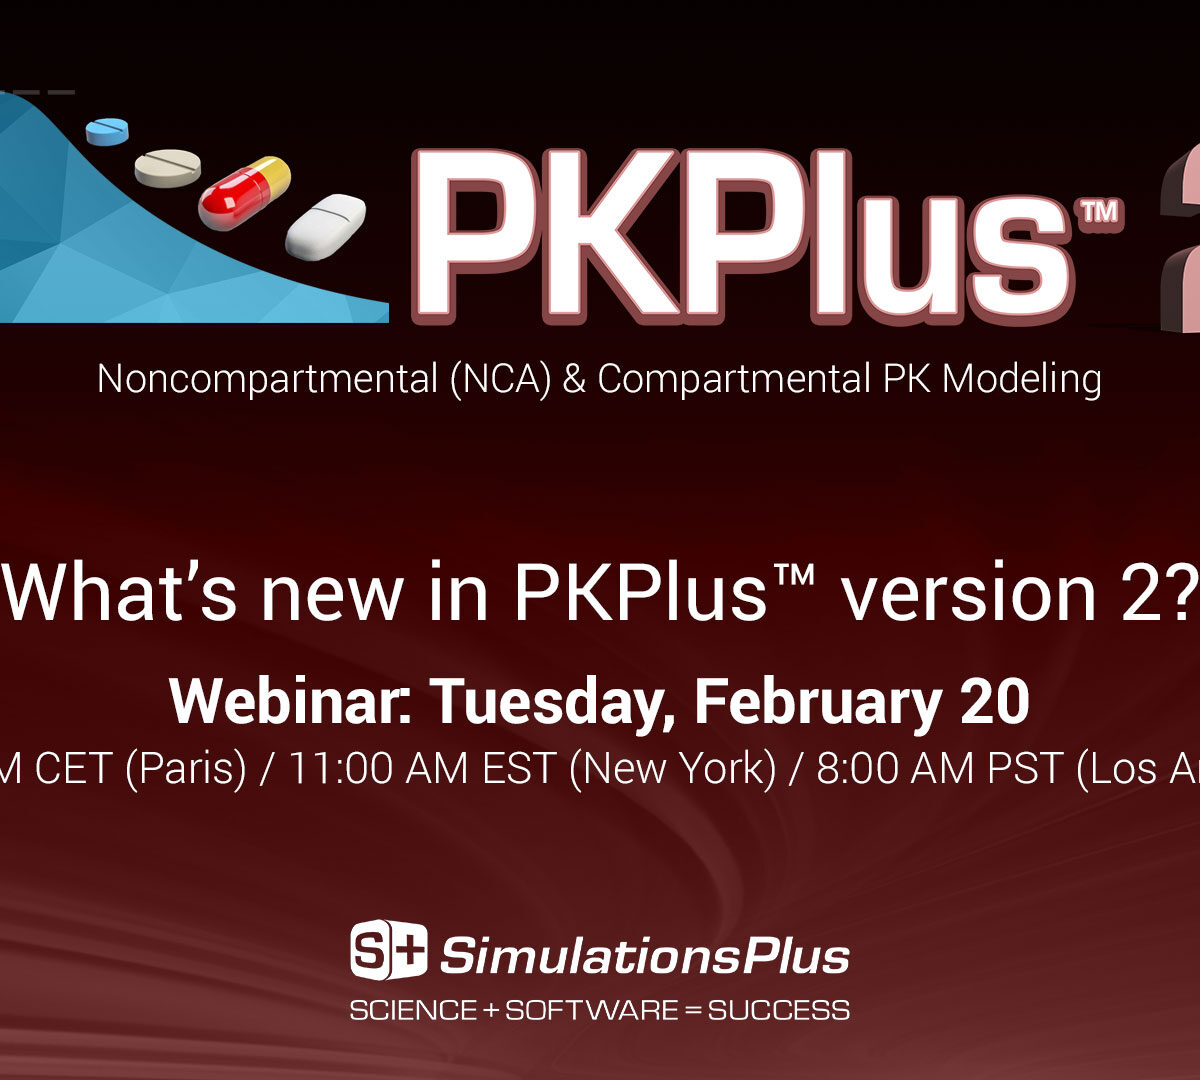 What’s new in PKPlus™ version 2?